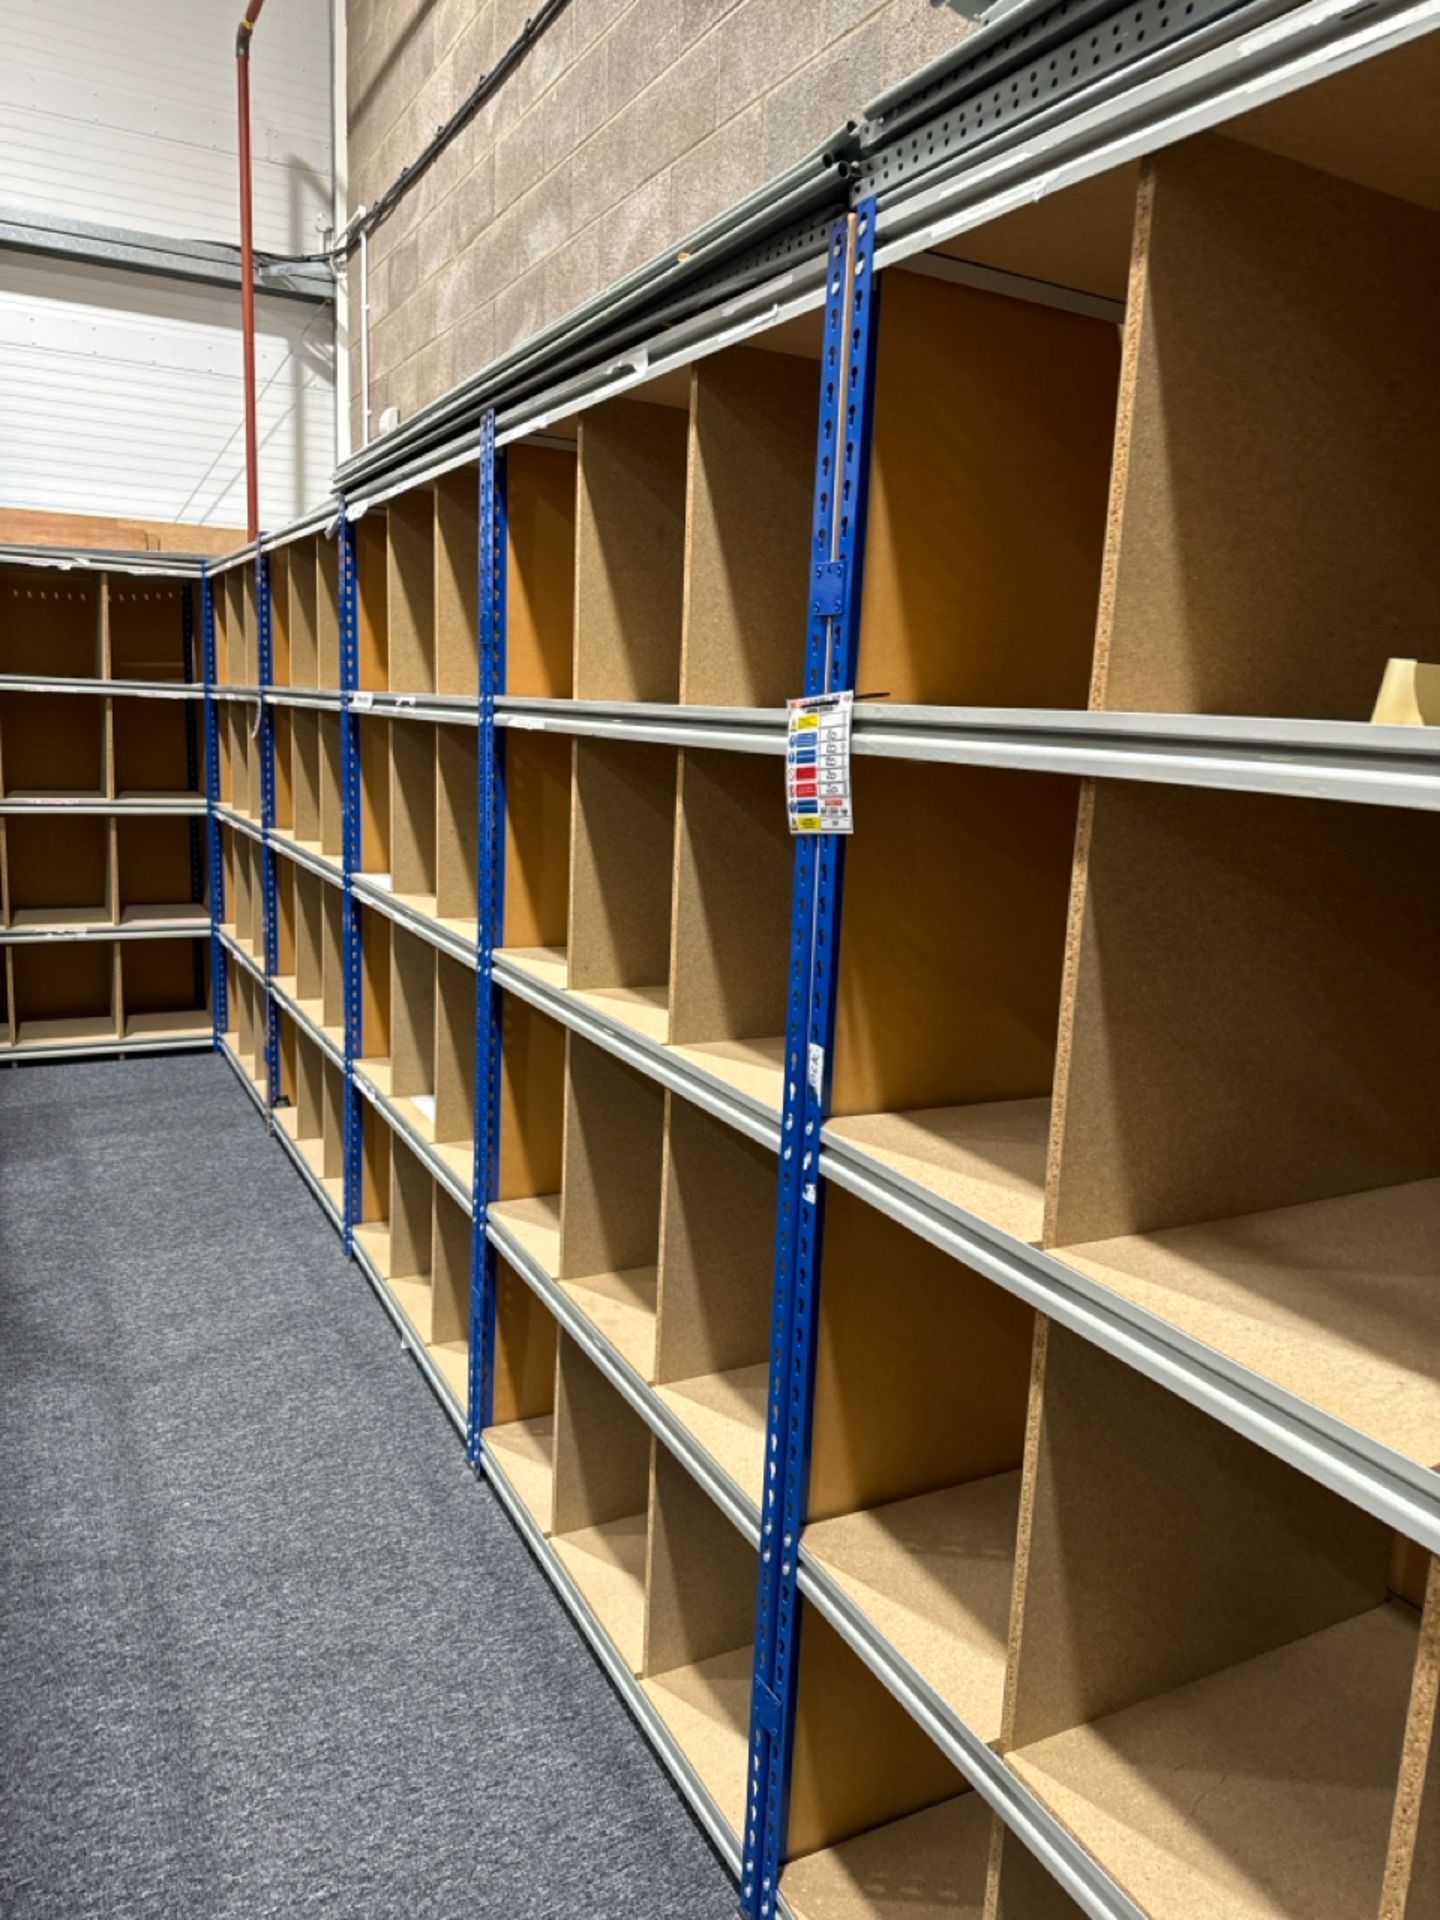 10 Bays of Boltless Racking With Box Storage - Image 3 of 7